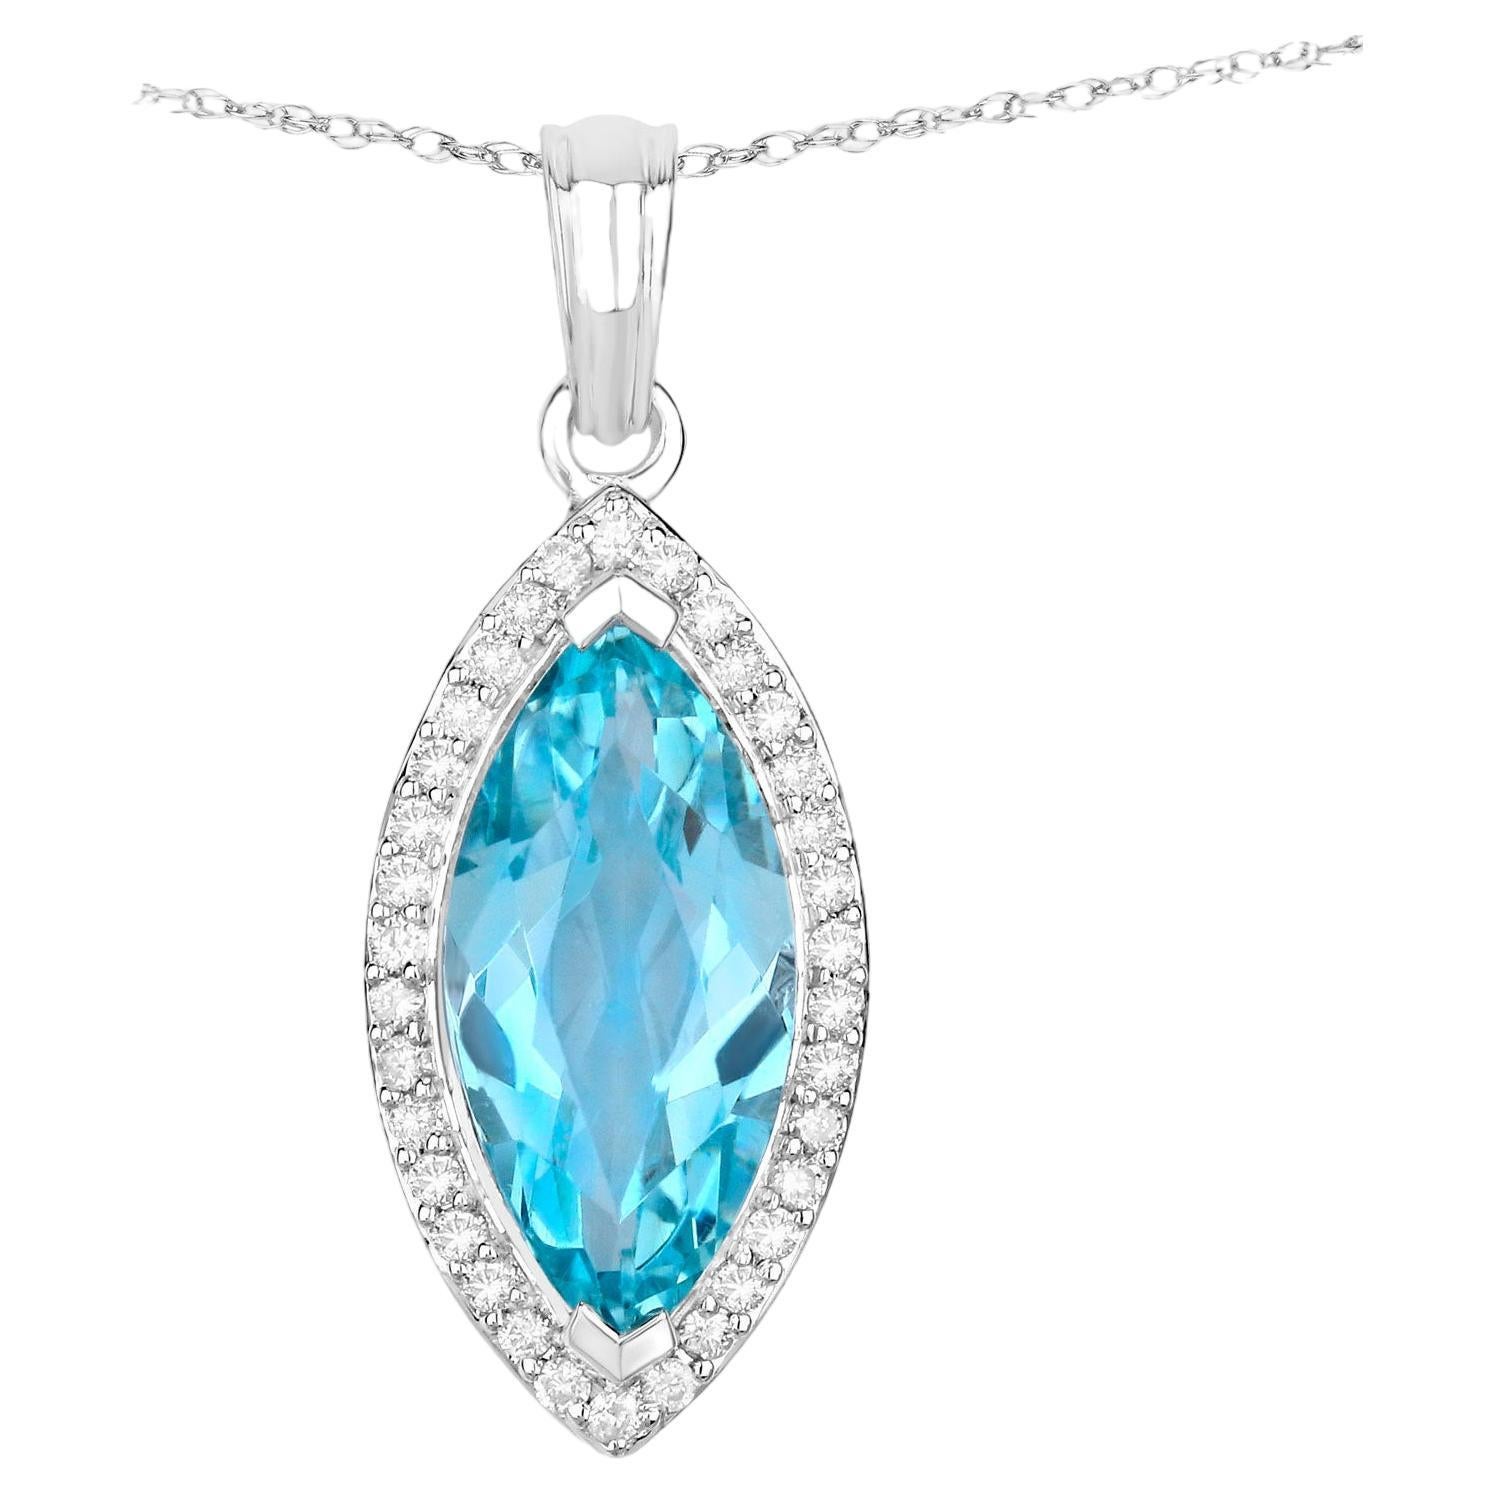 Aquamarine Necklace With Diamond Halo 2.55 Carats 14K White Gold For Sale